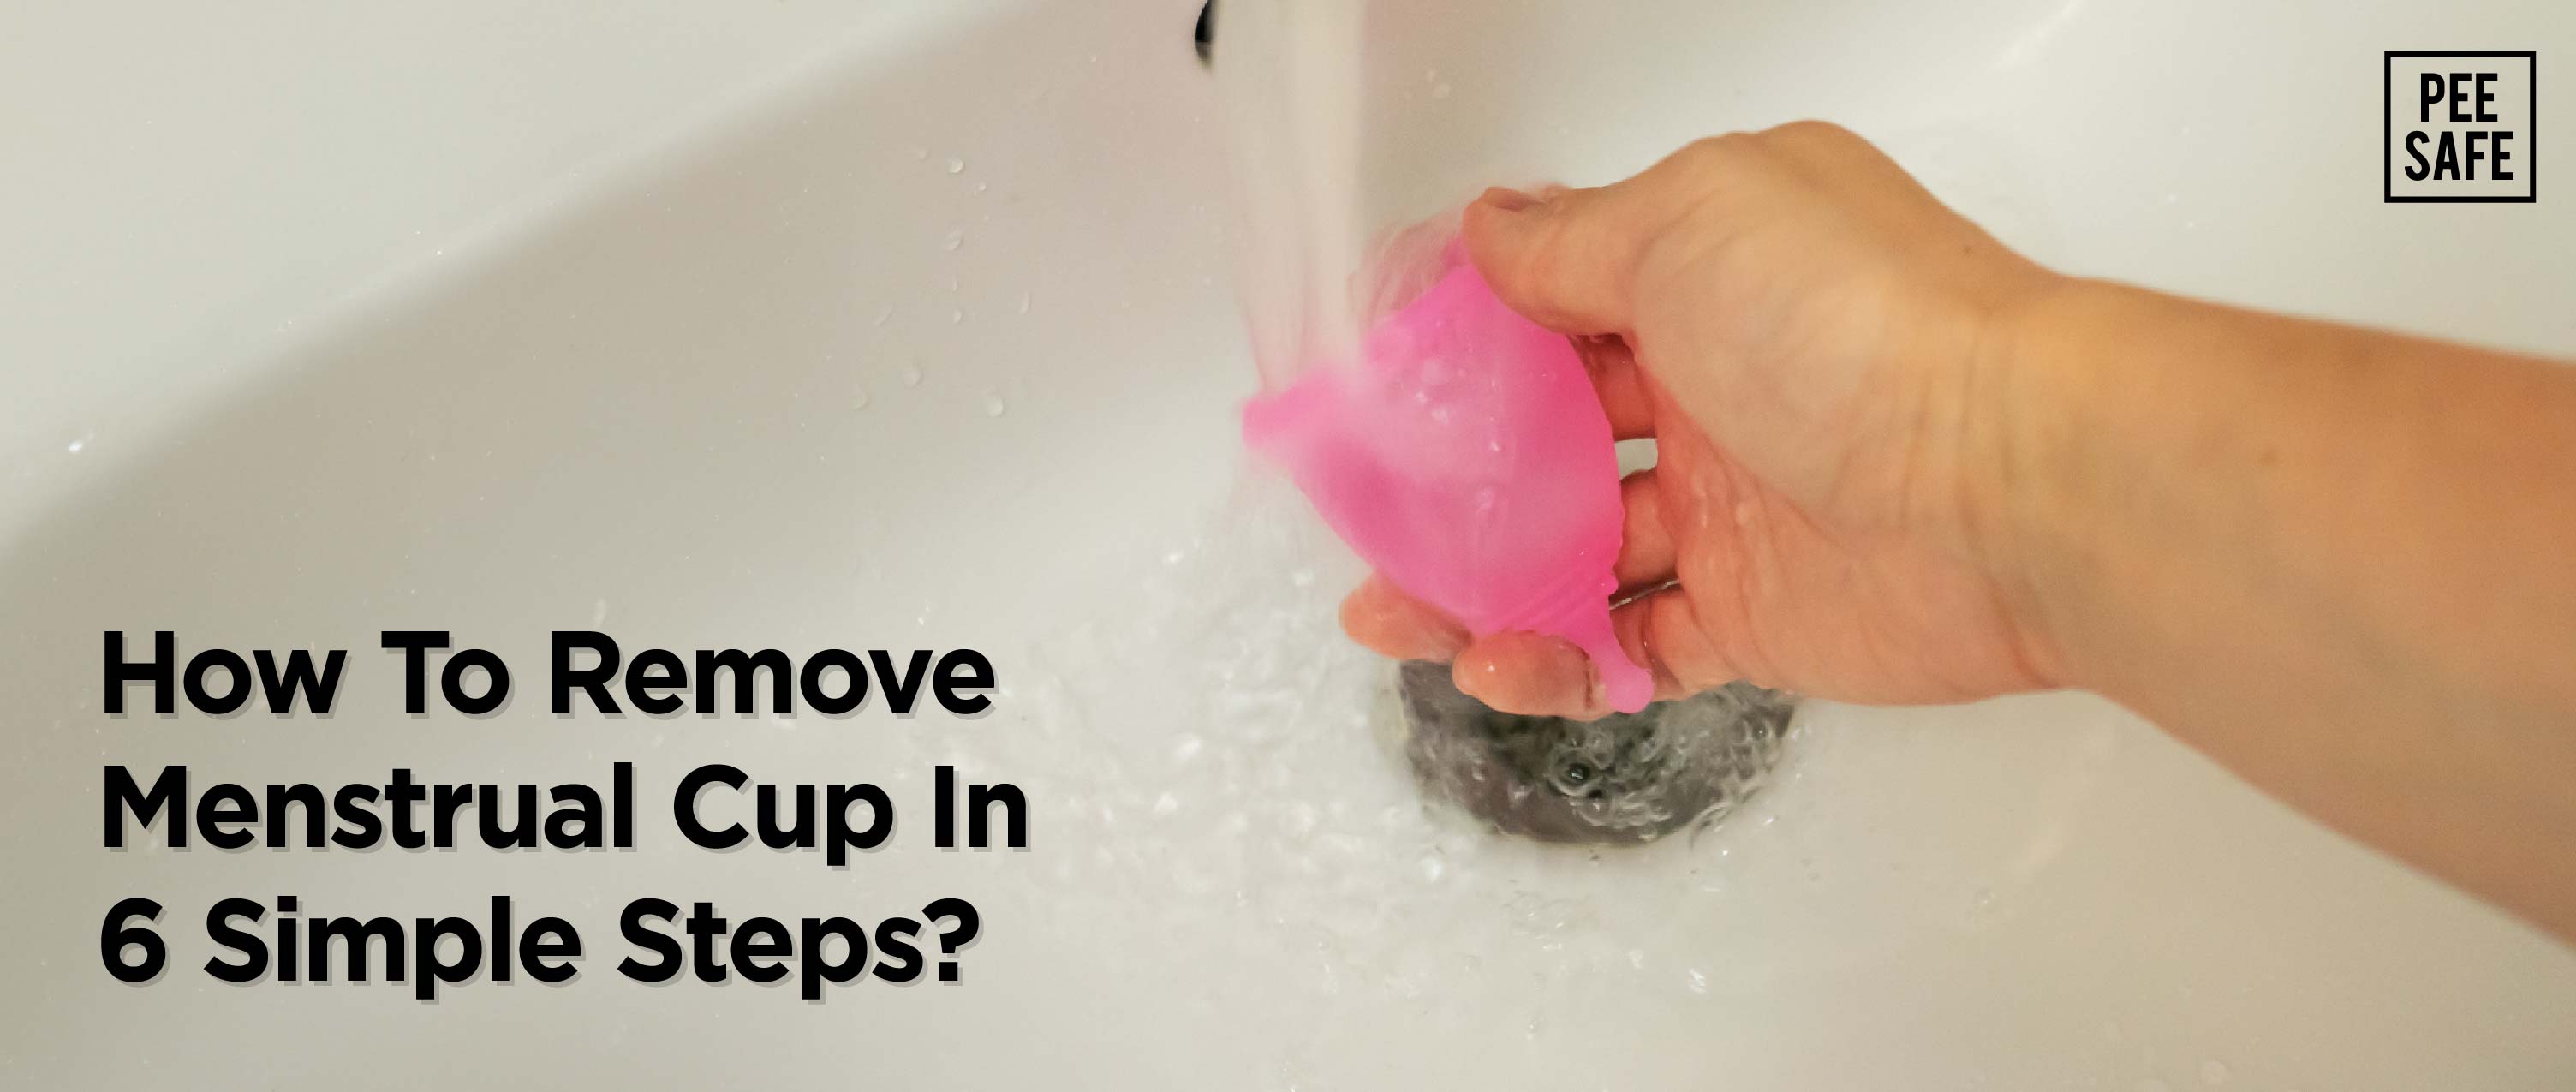  How To Remove Menstrual Cup In 6 Simple Steps?